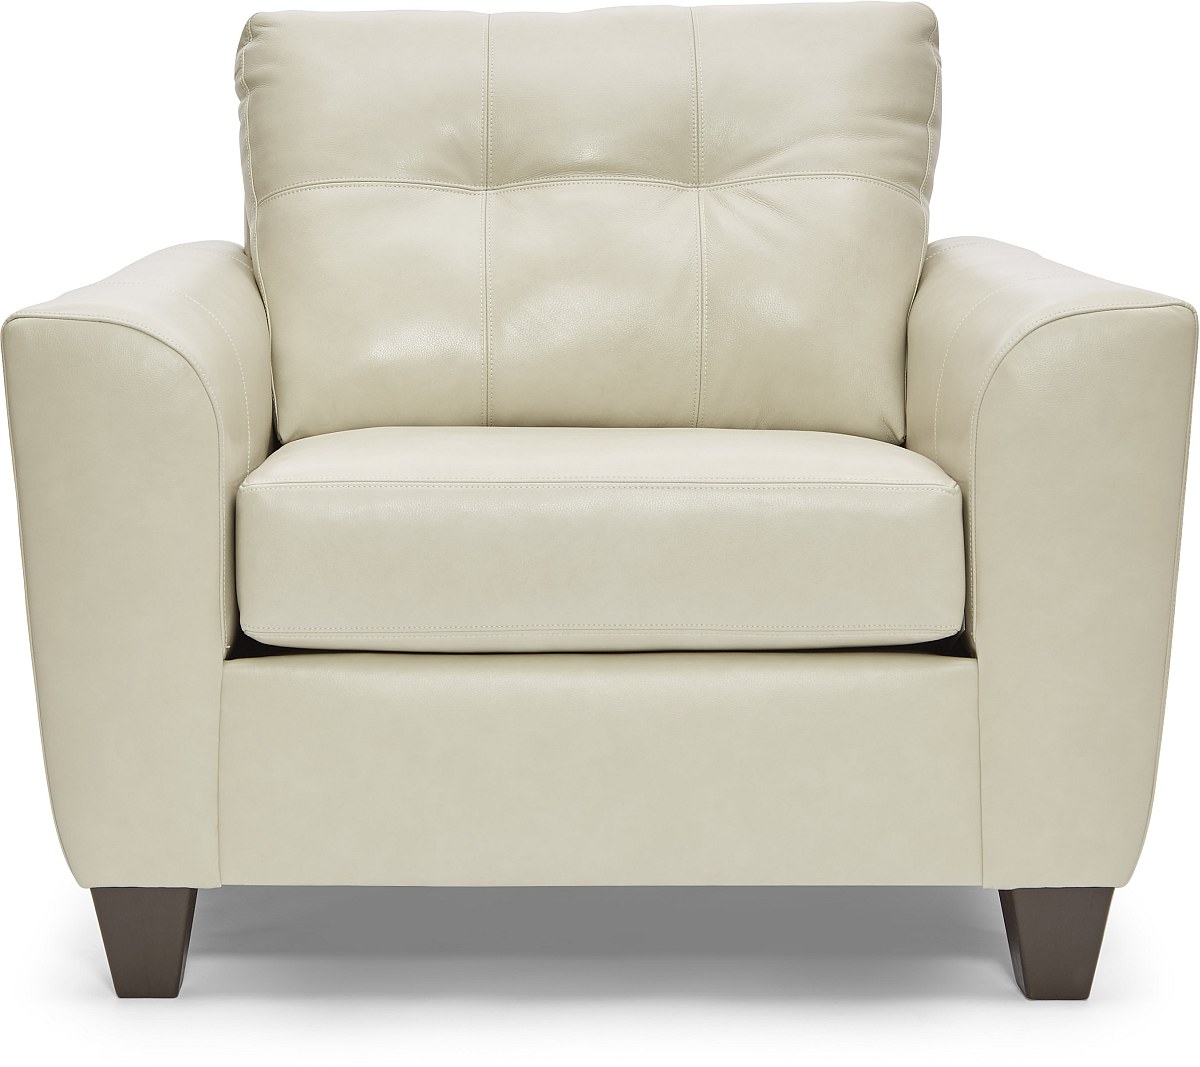 Lane® Home Furnishing Chadwick Soft Touch Cream Leather Chair